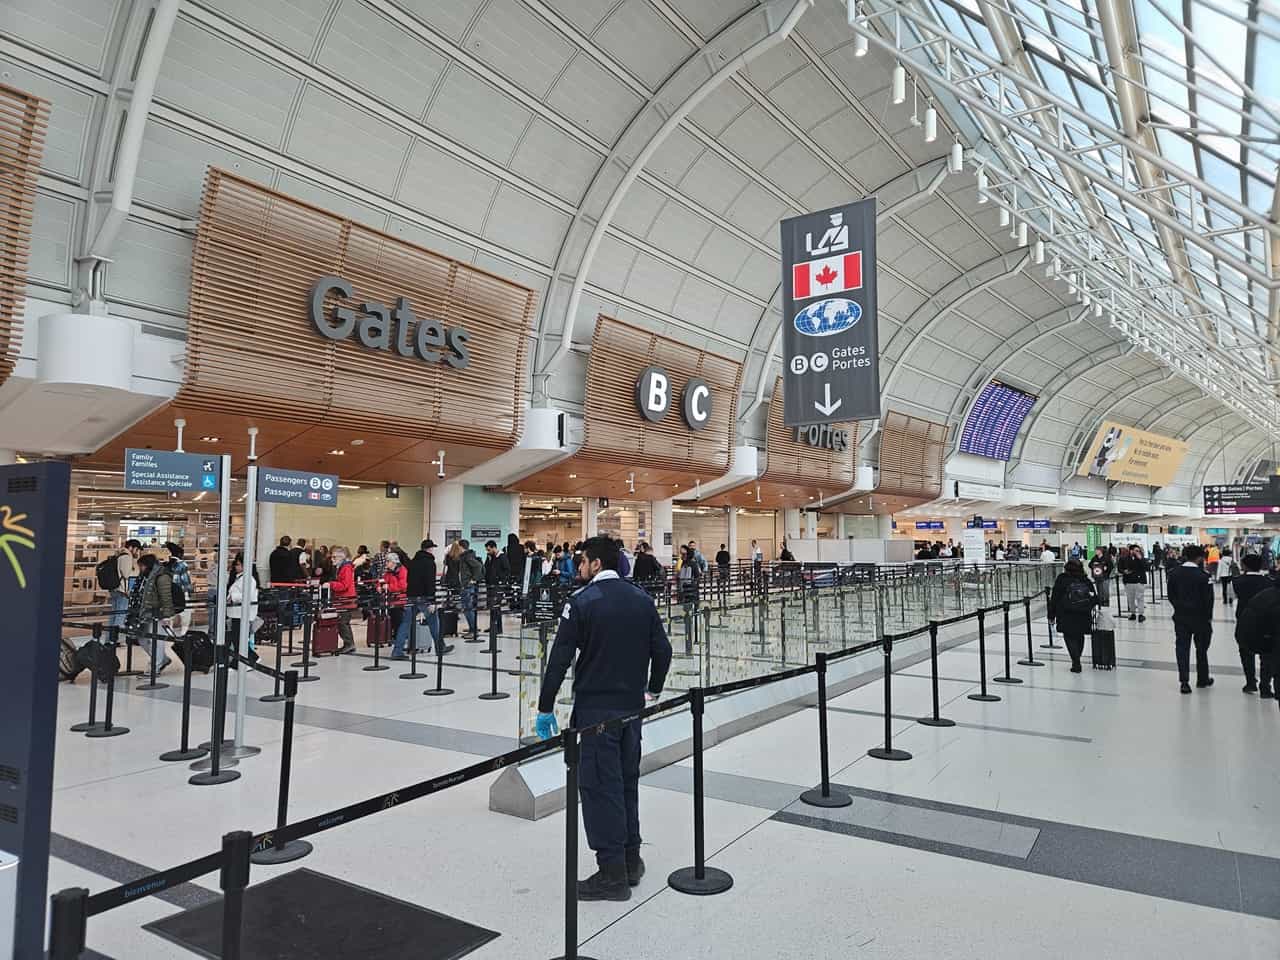 Indian citizens seek asylum in Canada after travelling to Pearson Airport in Mississauga without proper documents.